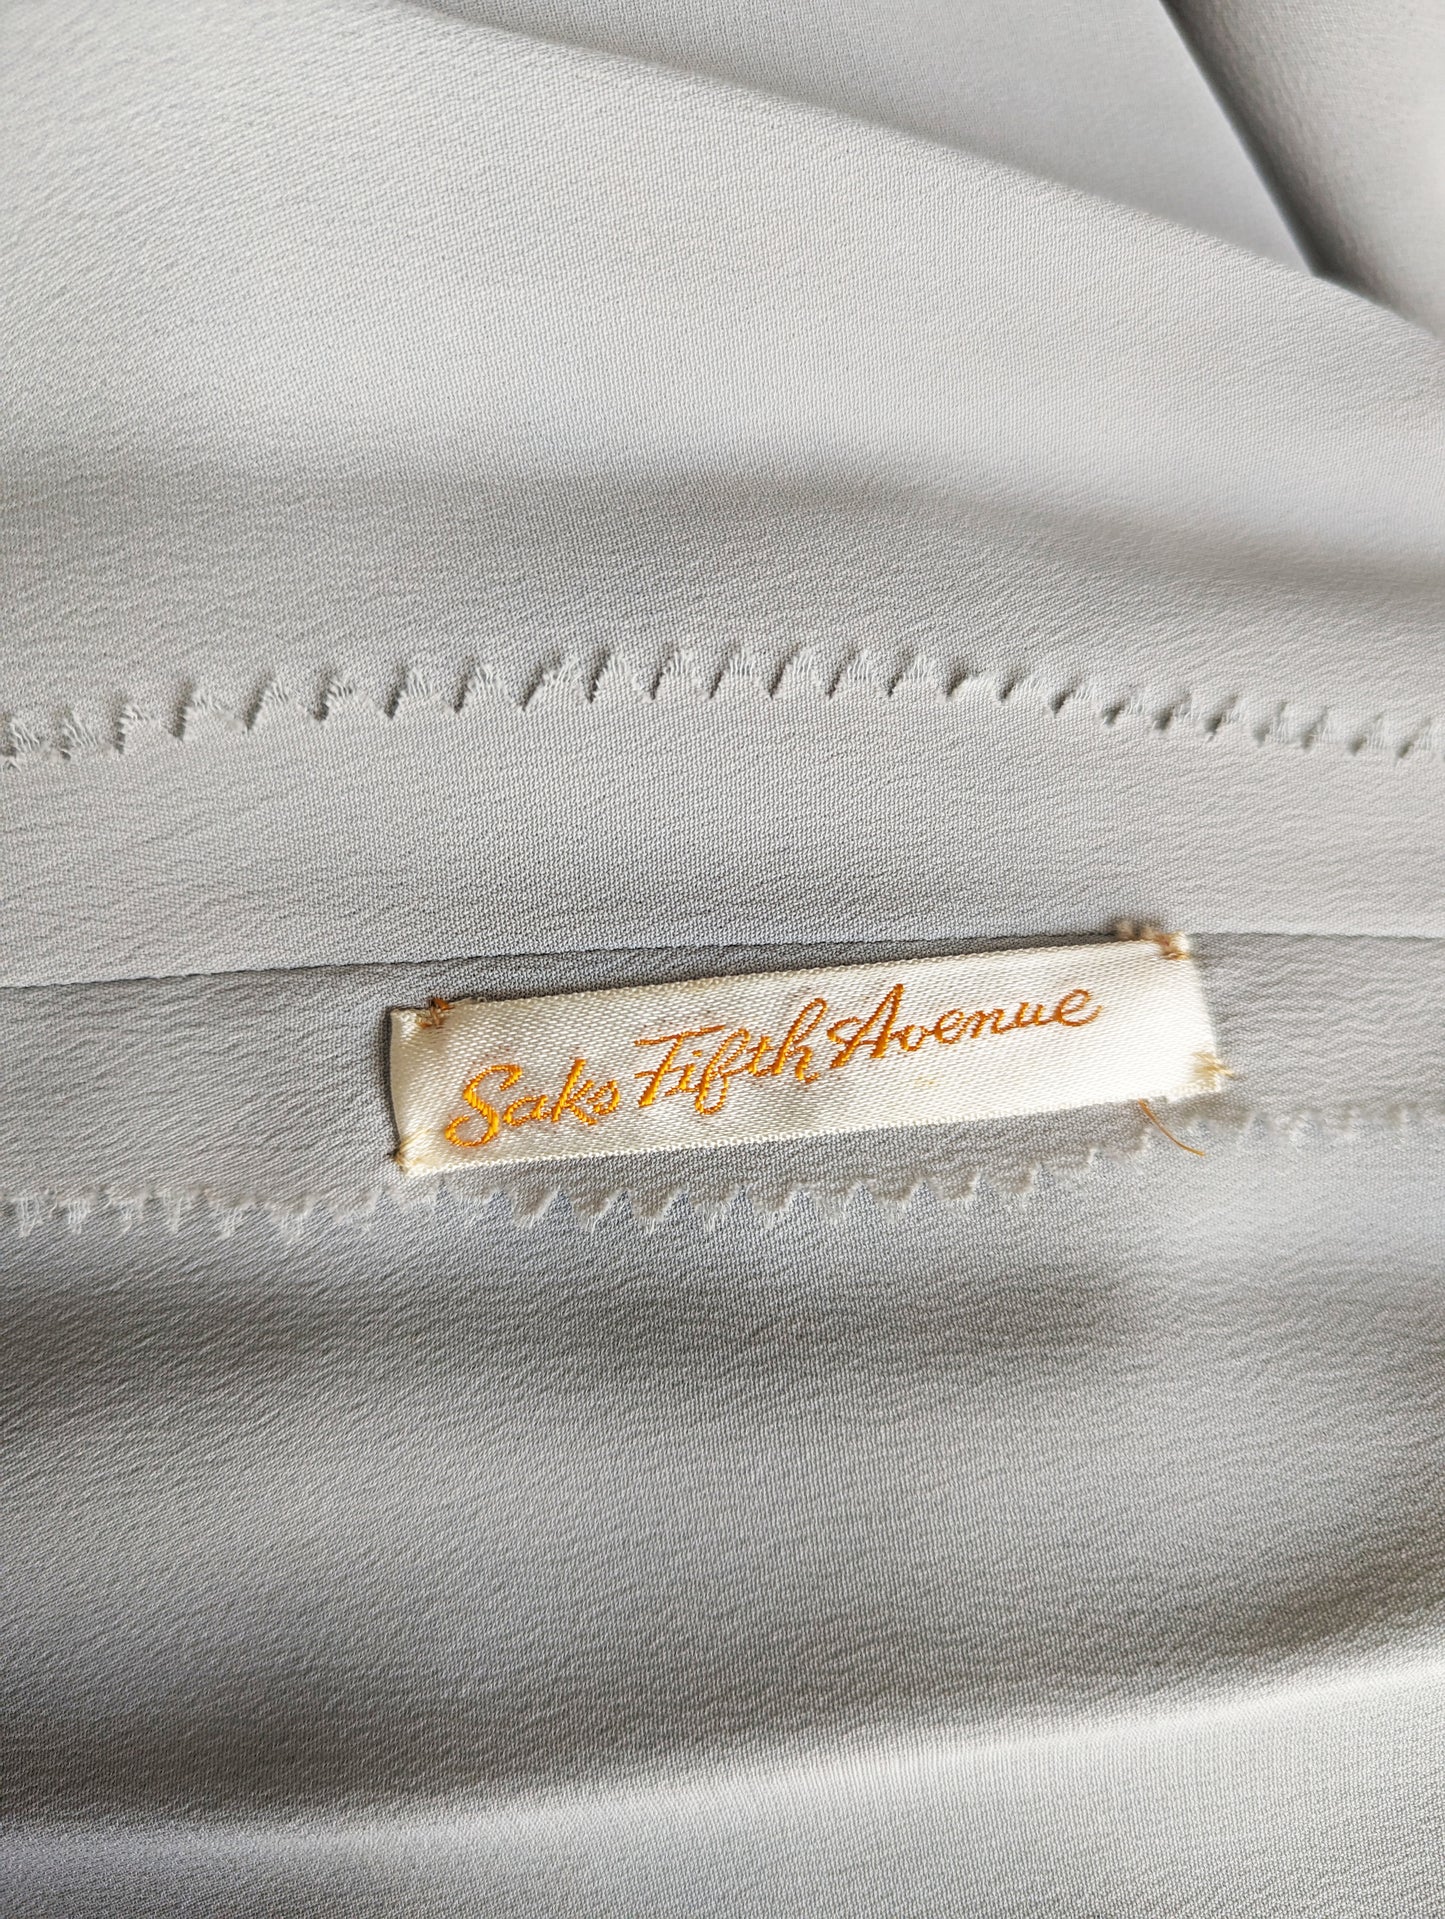 close up of the tag which says Saks Fifth Avenue